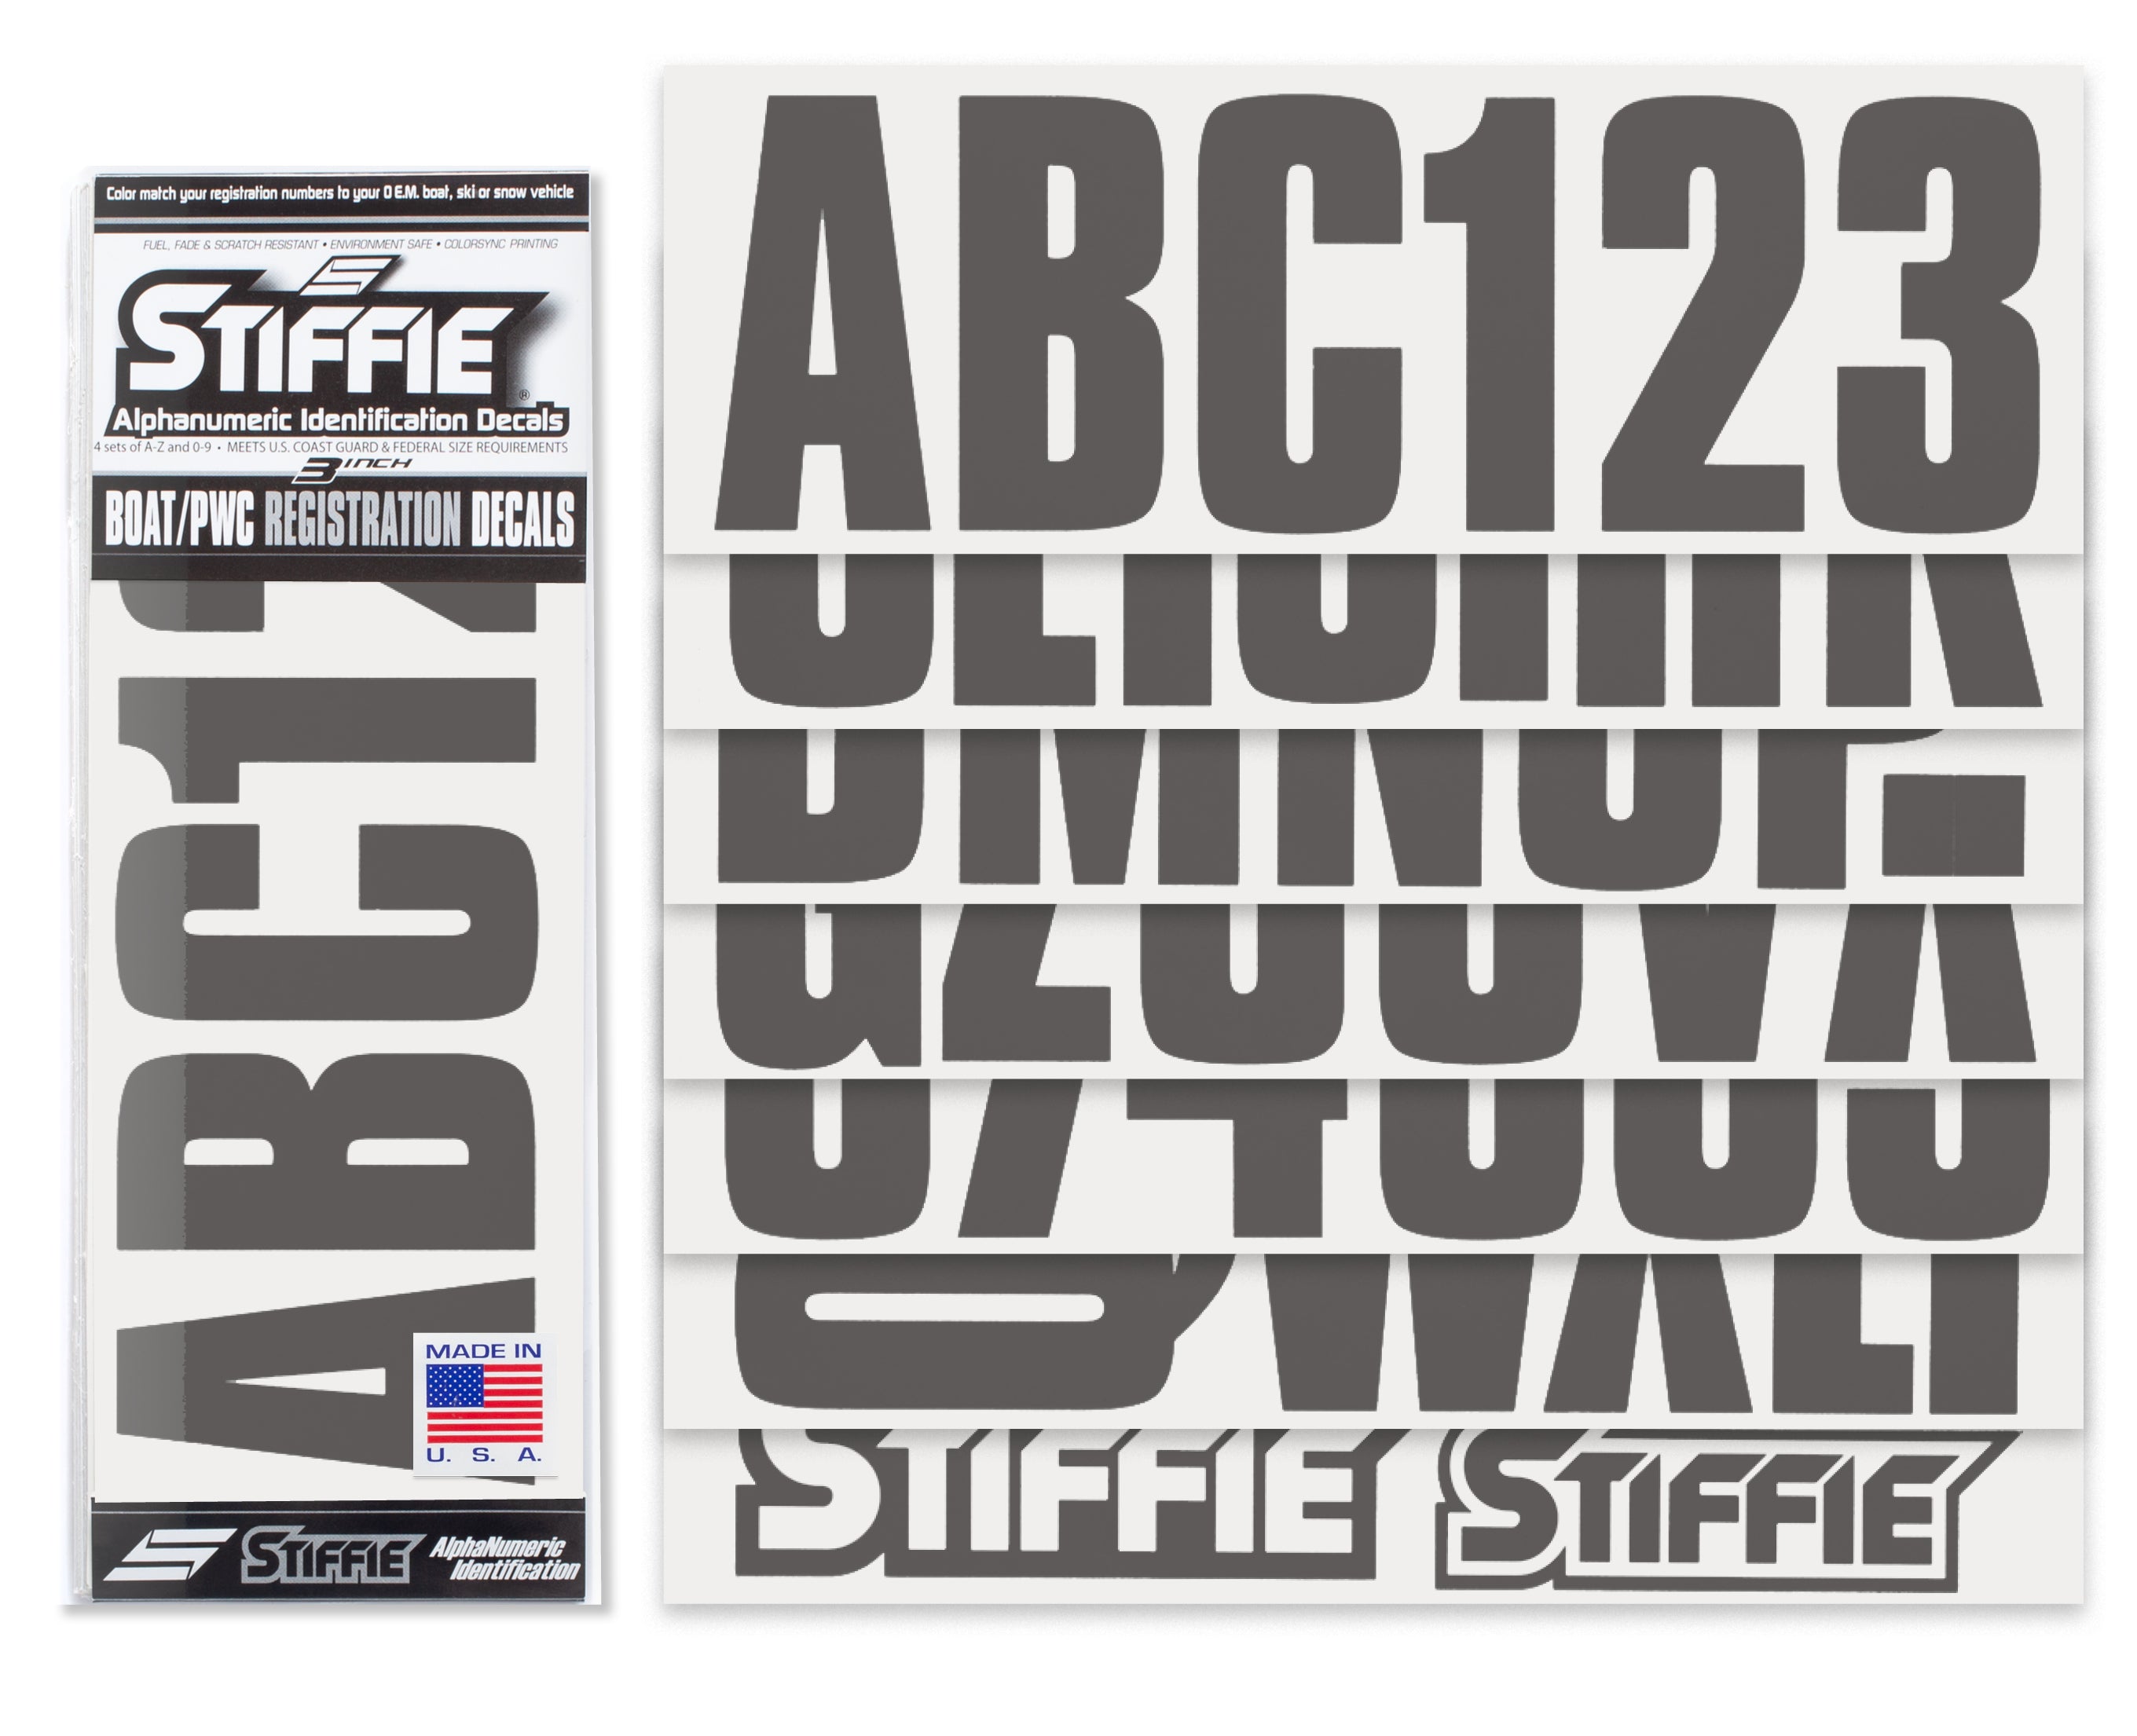 STIFFIE Uniline Gunmetal 3" ID Kit Alpha-Numeric Registration Identification Numbers Stickers Decals for Boats & Personal Watercraft